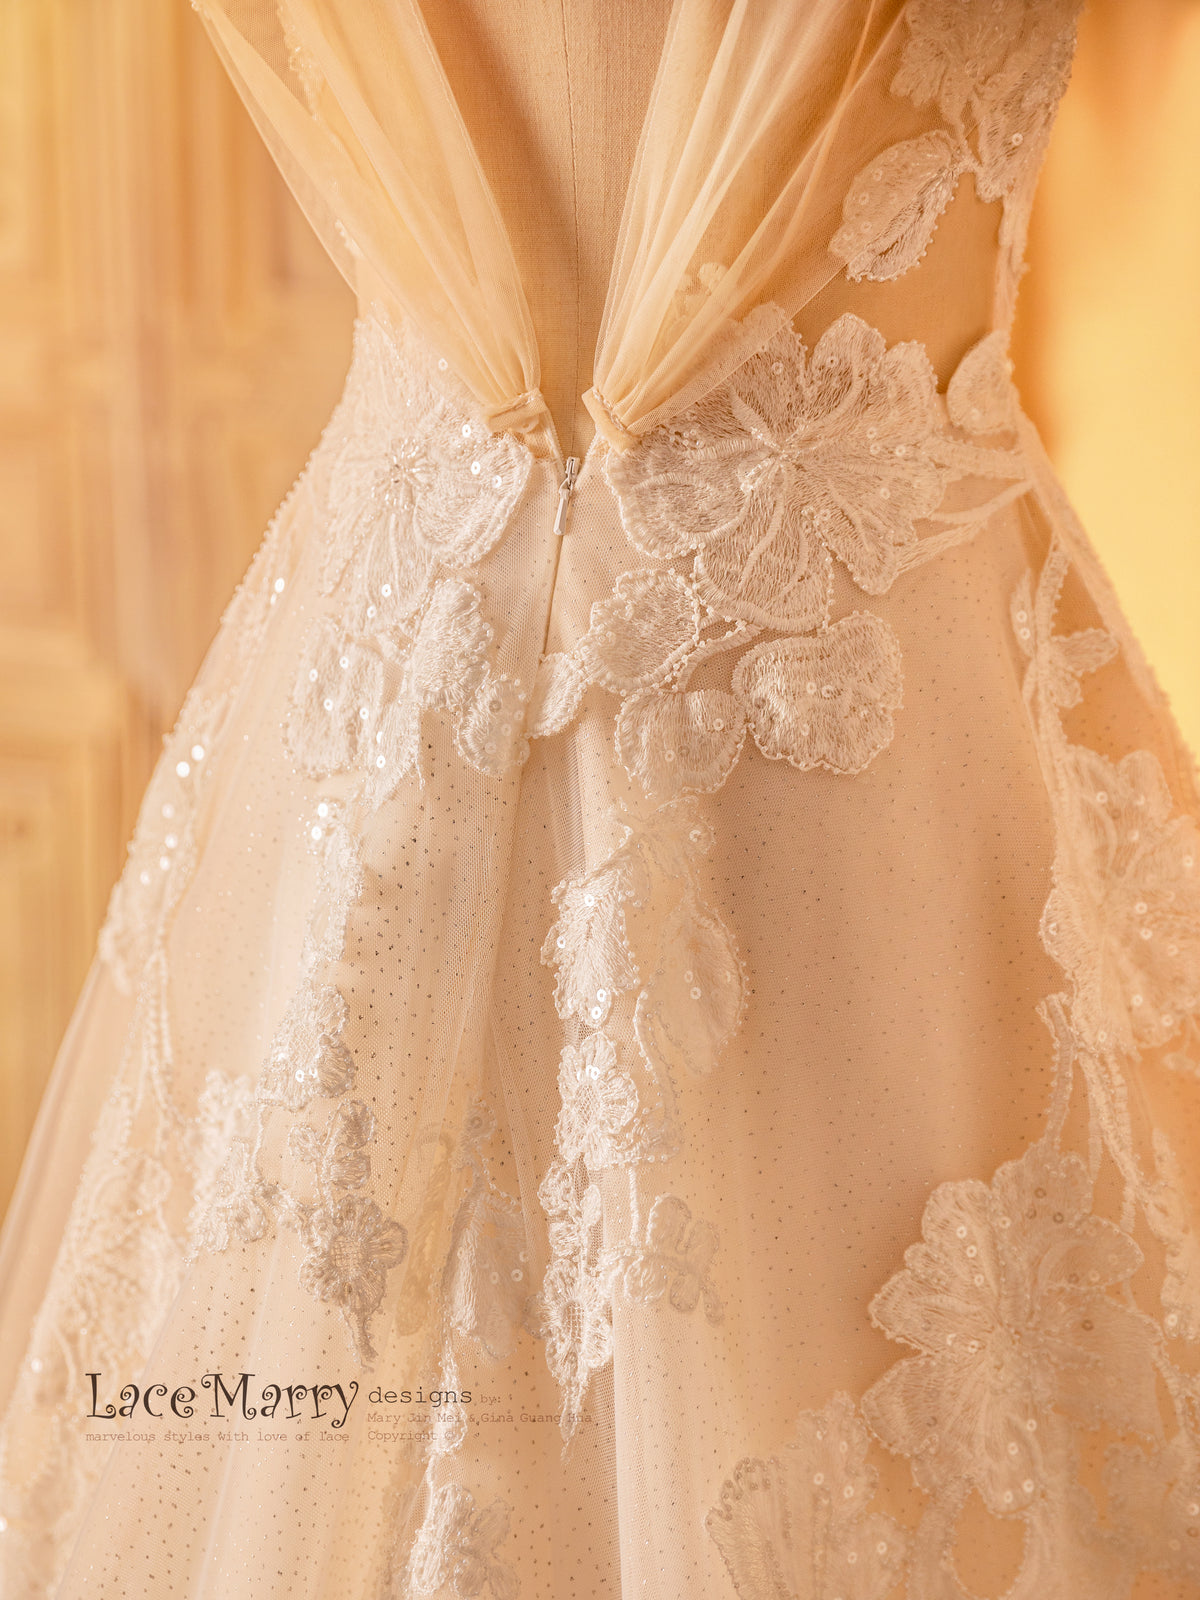 Bridal Wedding Dress with Sparkling Tulle